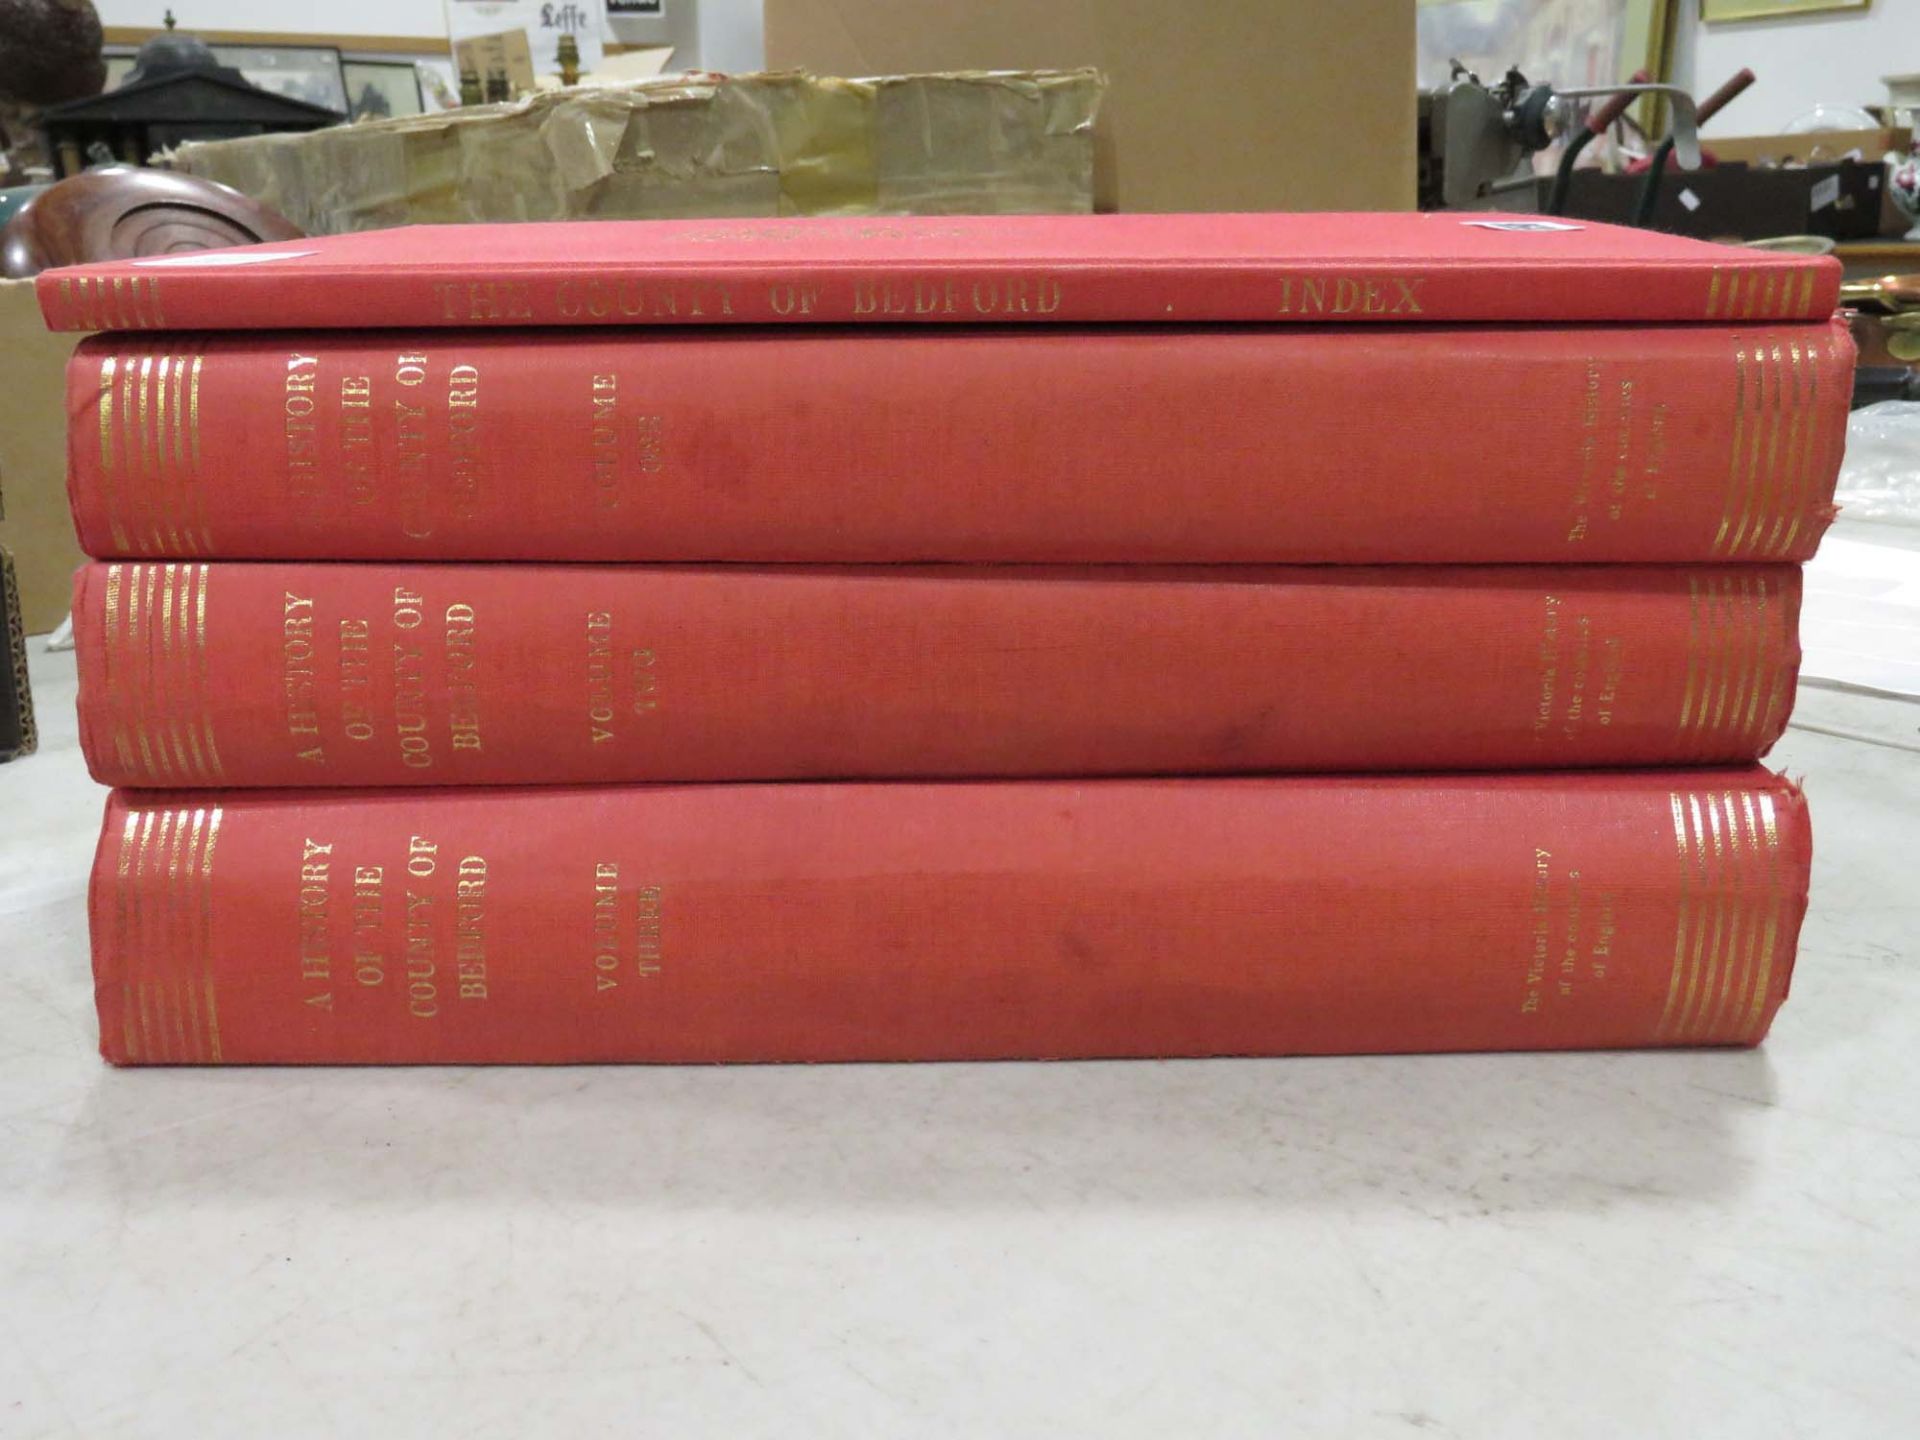 4 volumes 'The History of the County of Bedford'